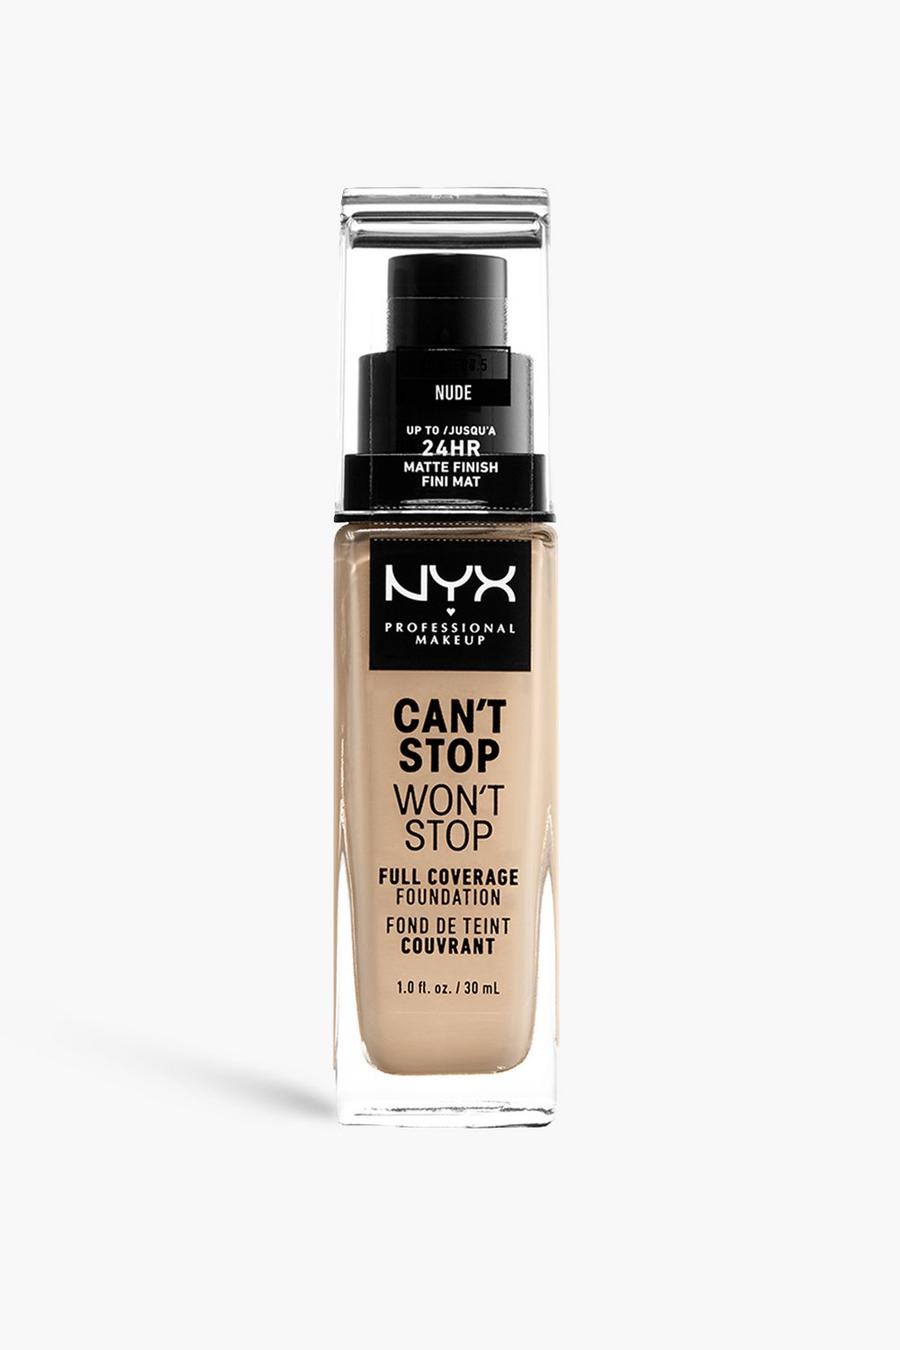 NYX Professional Makeup Can't Stop Won't Stop Fondotita a copertura totale, Nude color carne image number 1